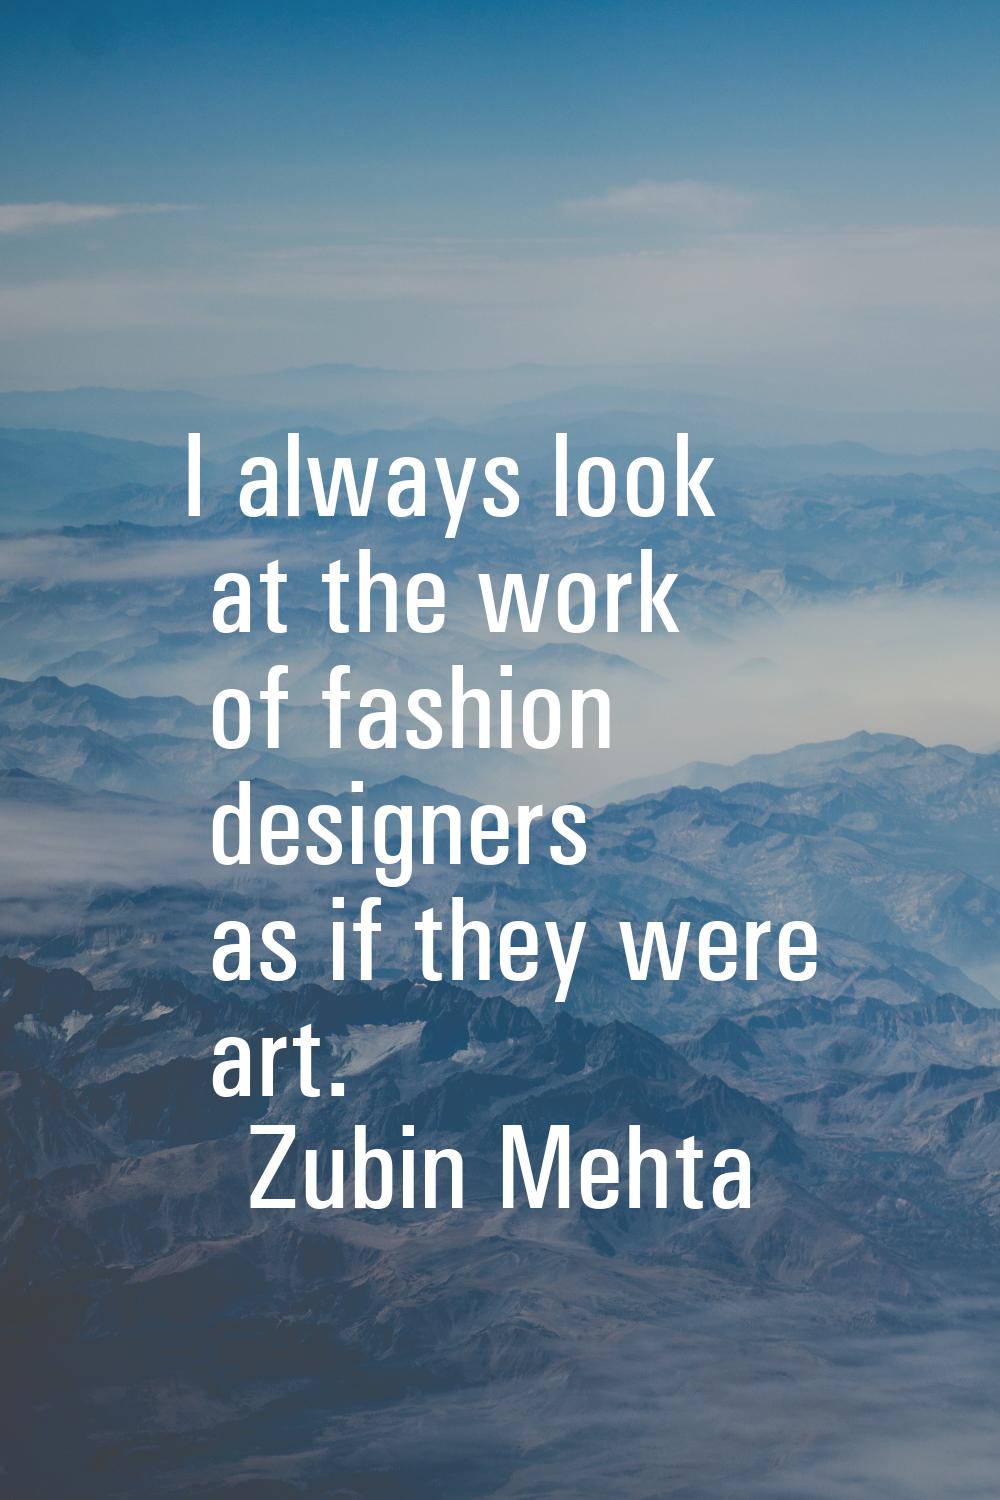 I always look at the work of fashion designers as if they were art.